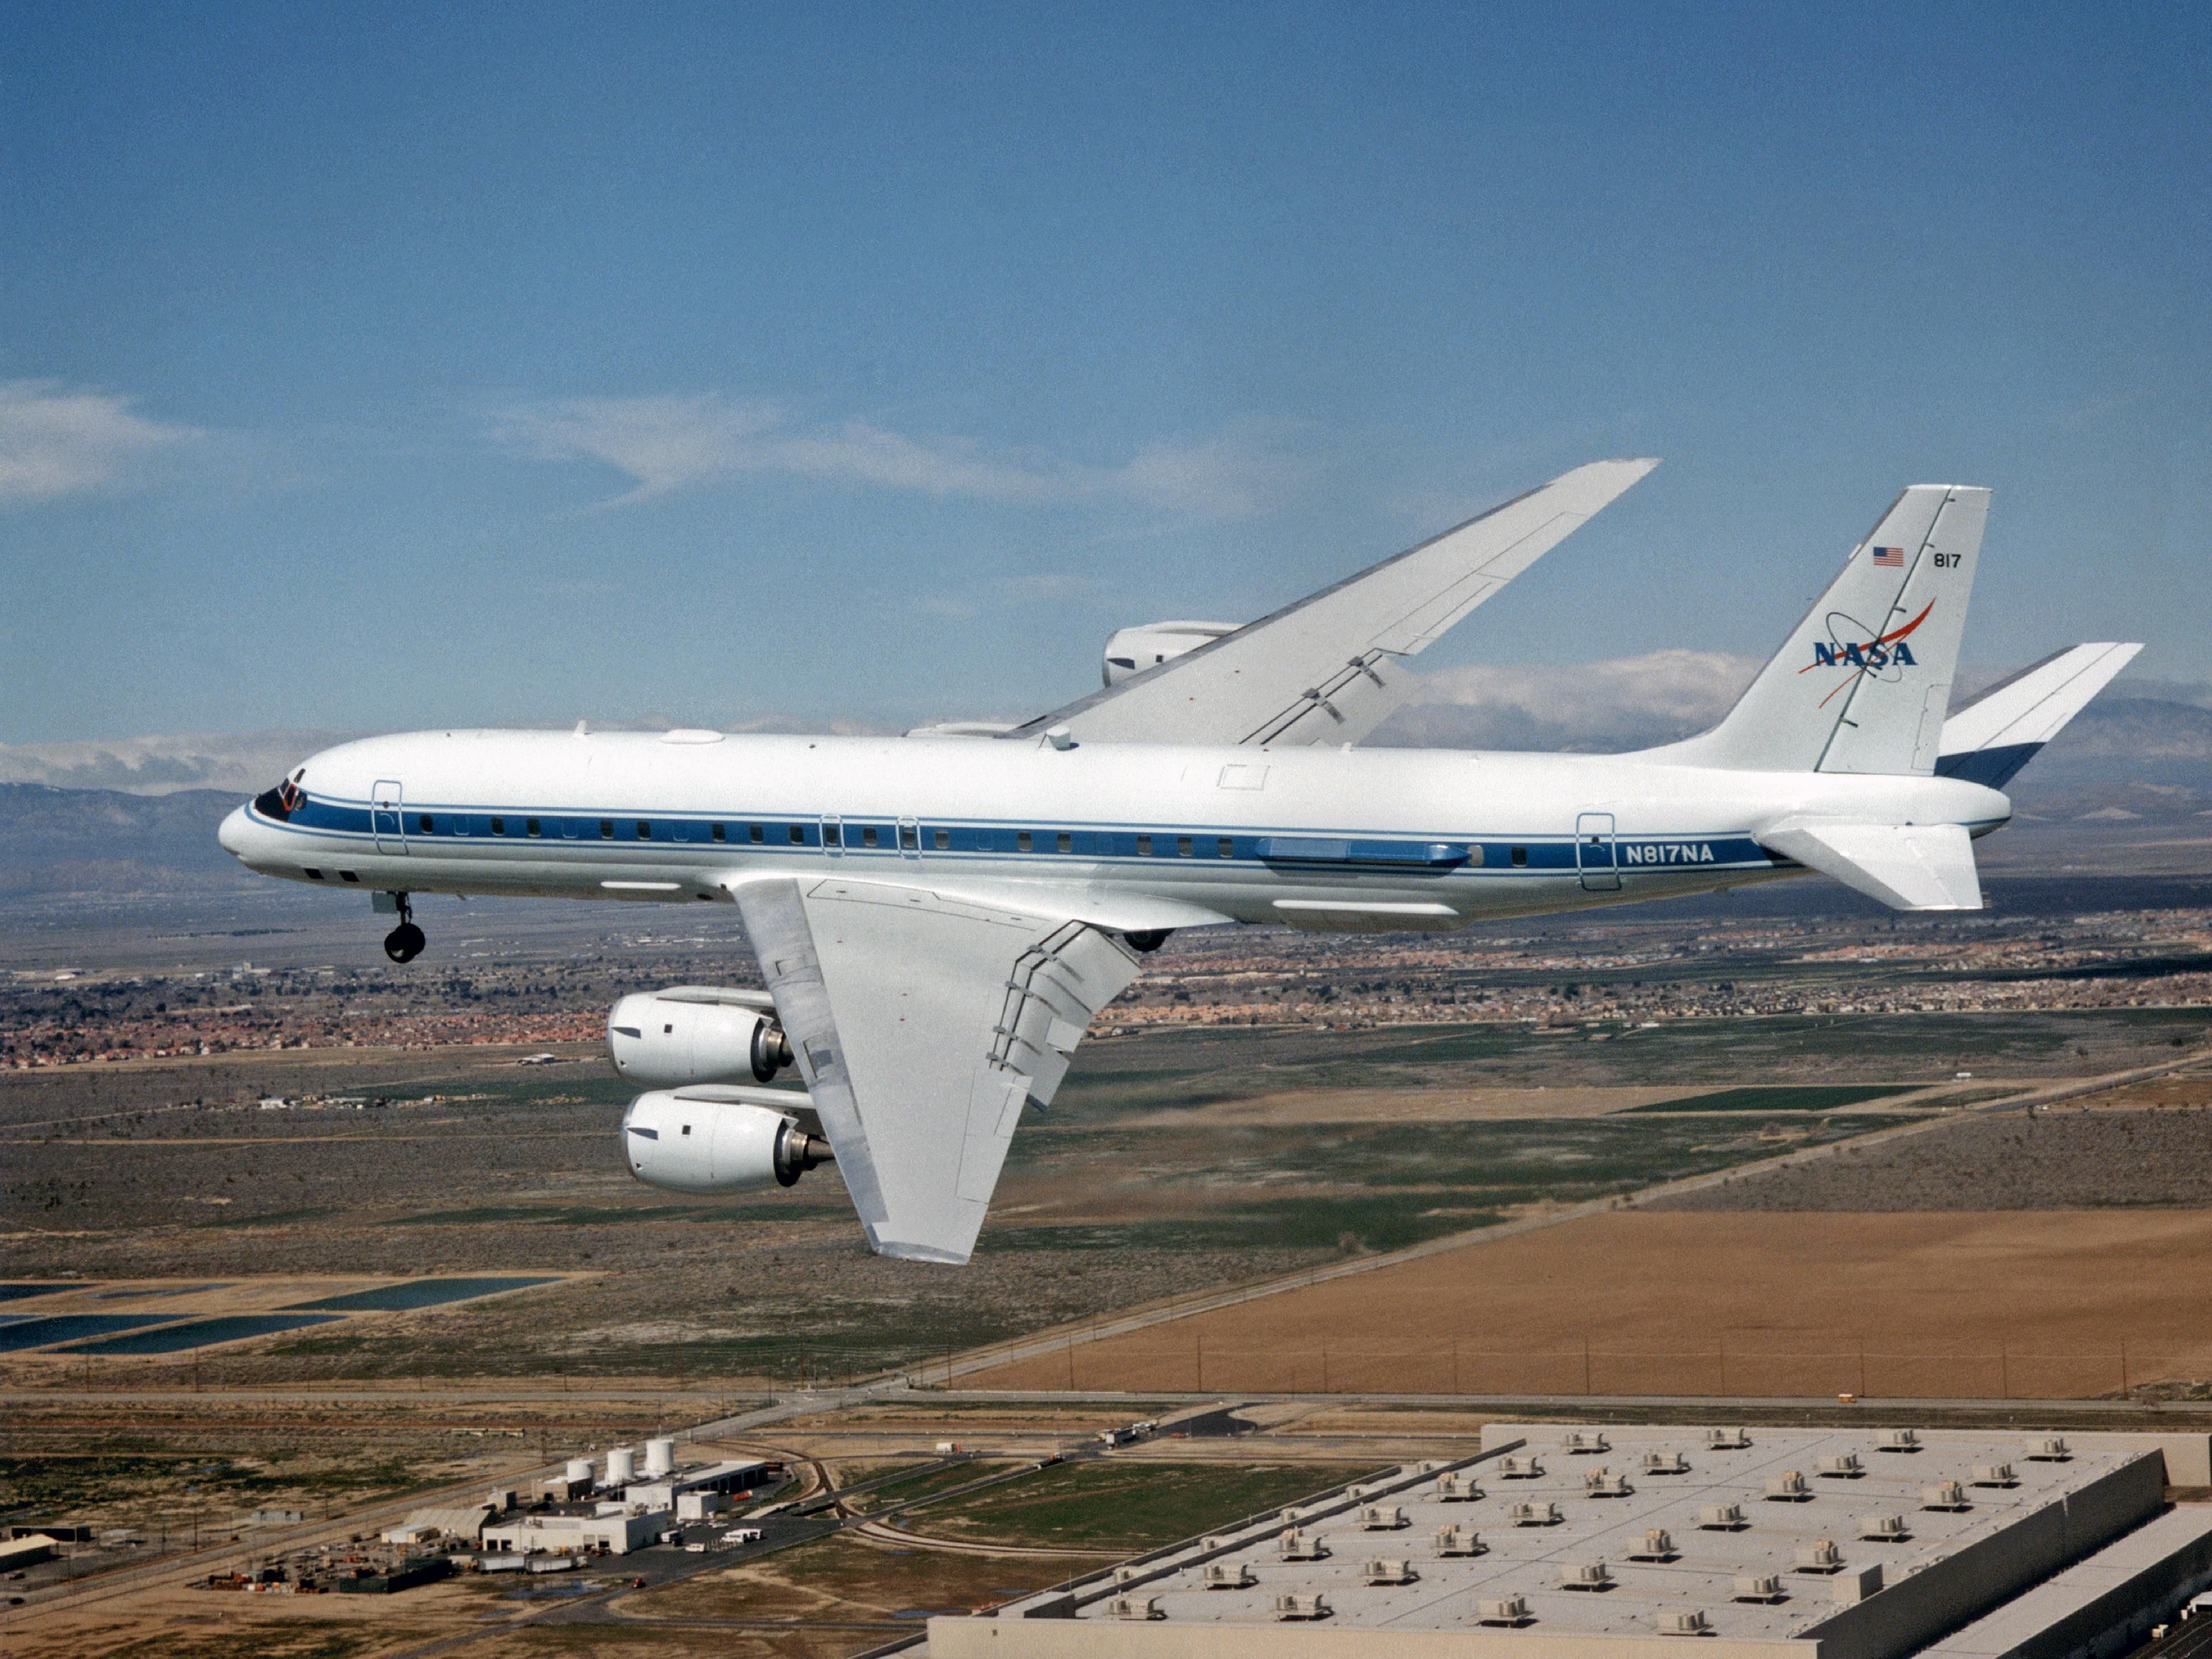 NASA's McDonnell Douglas DC-8 Air Laboratory flies in the sky.